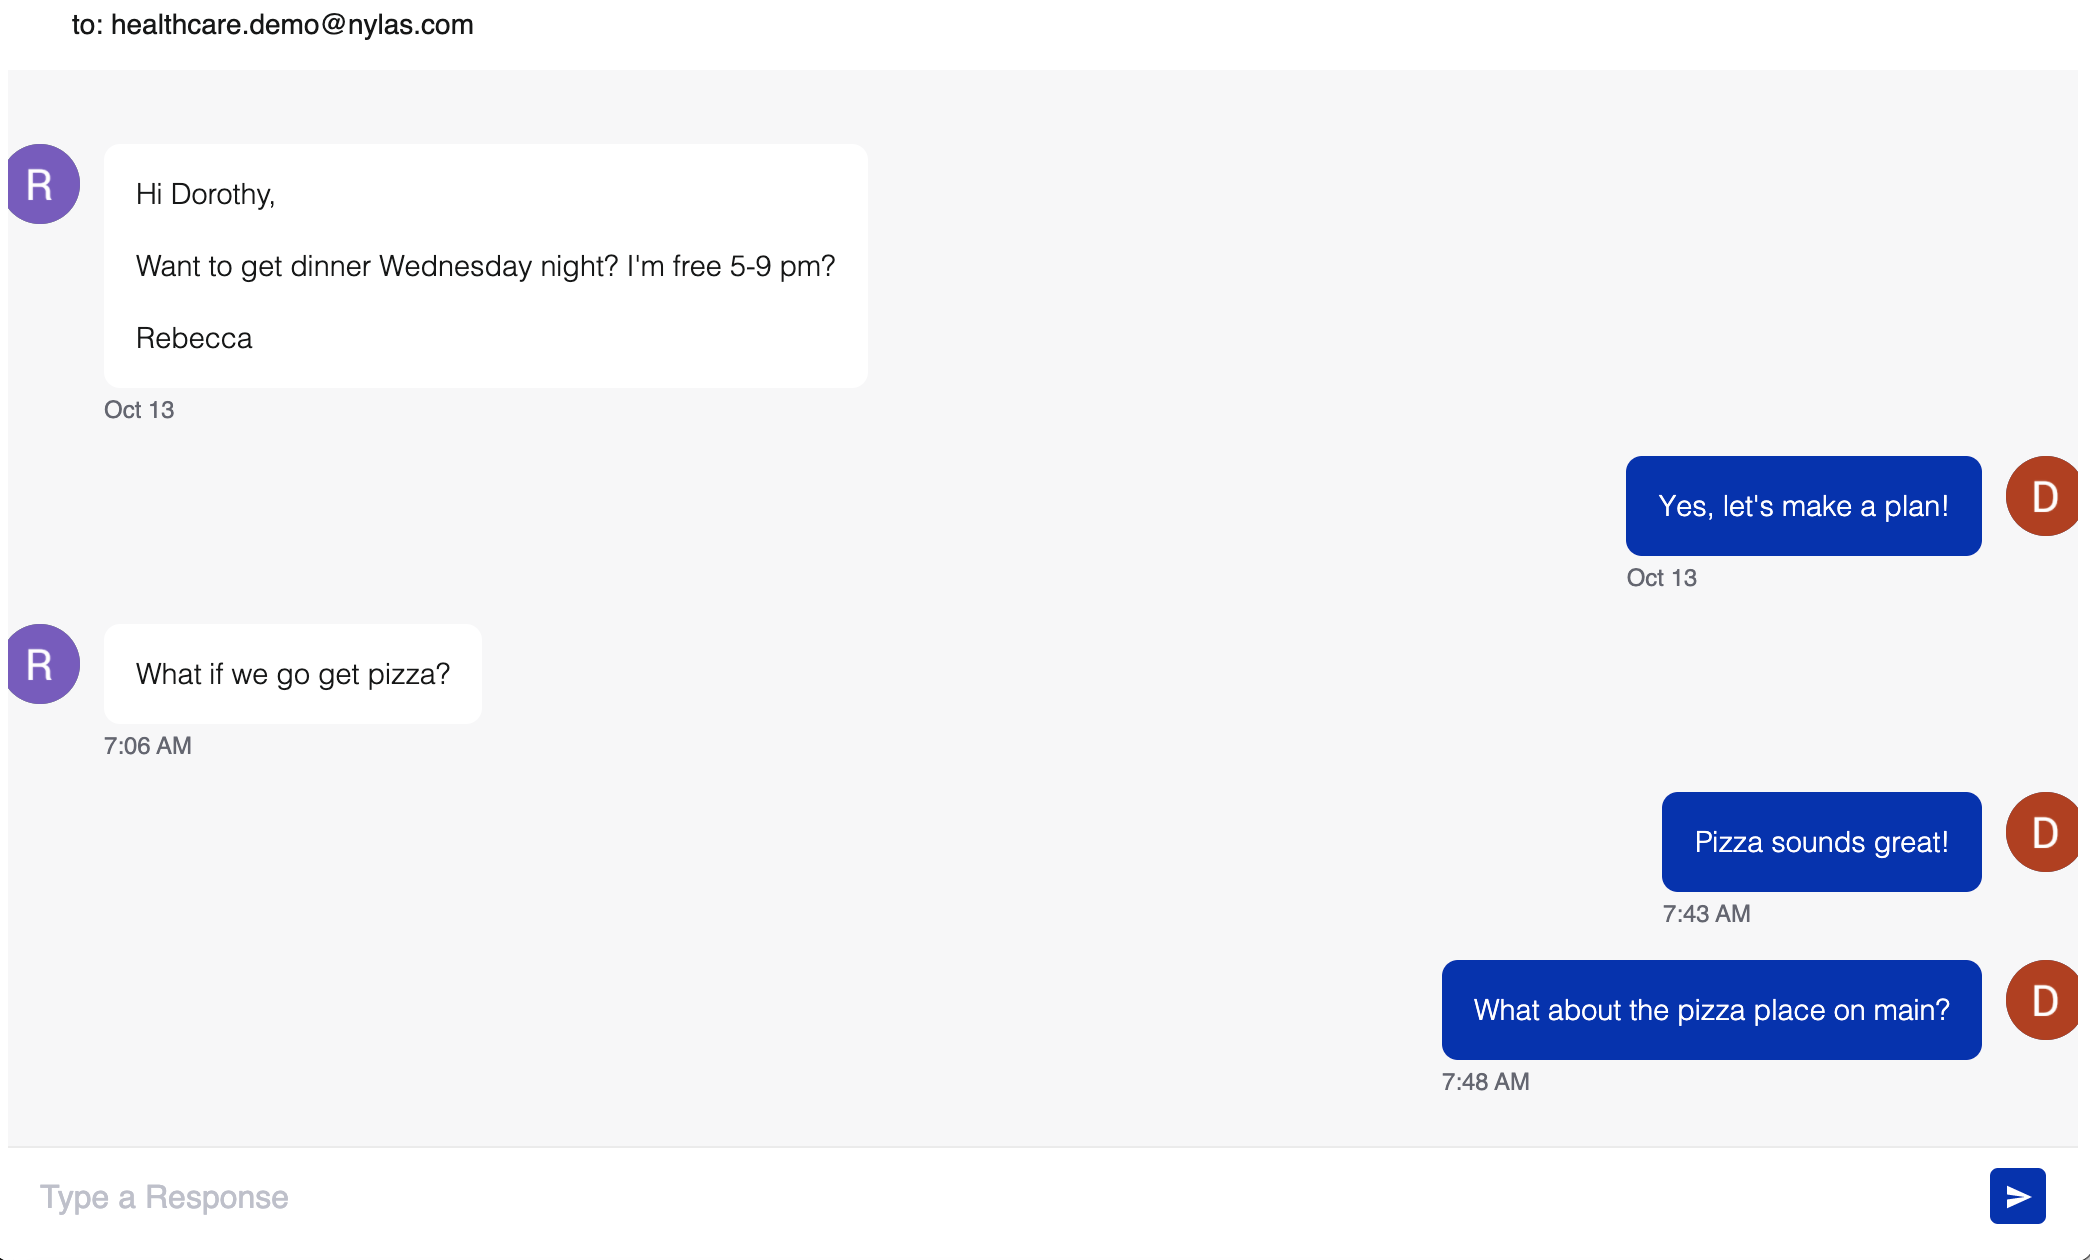 Static image showing a fictional conversation between two people about getting pizza.